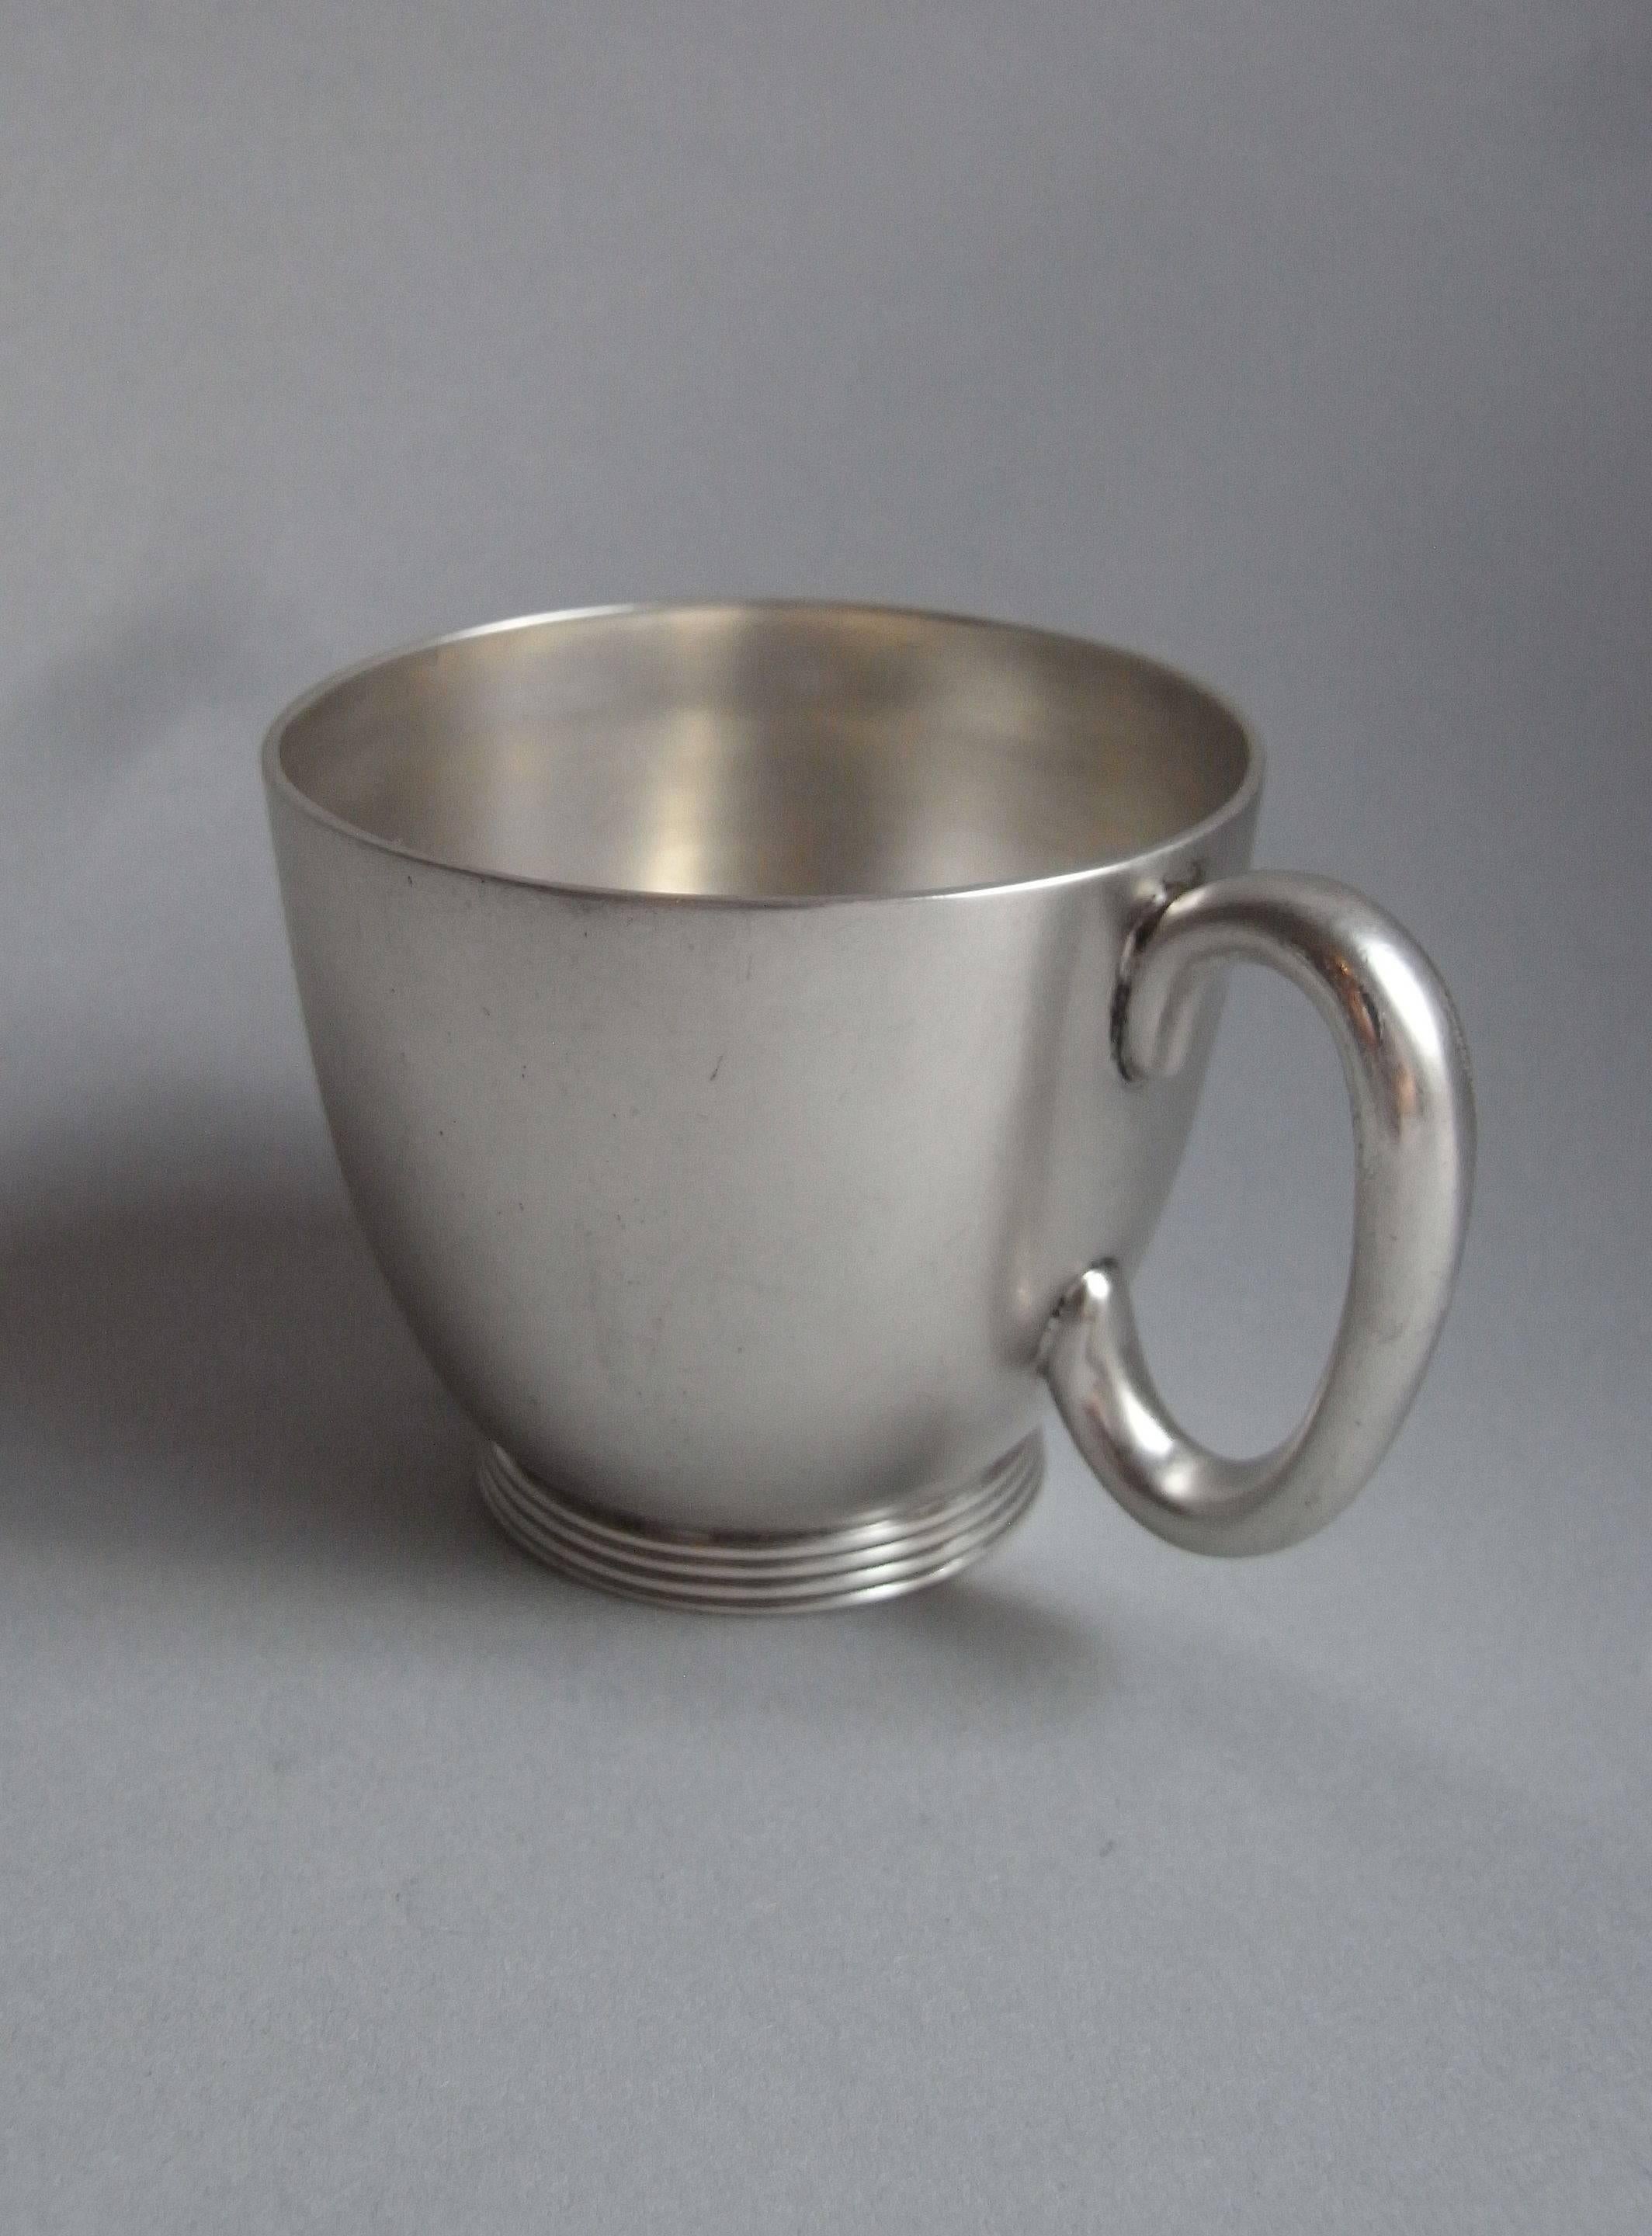 This exceptionally rare piece may well have been used during picnics and is of plain design. The Saucer is circular in form, with a raised edge and stands on a reeded ring foot. The Cup has a plain loop handle and also stands on a reeded ring foot.